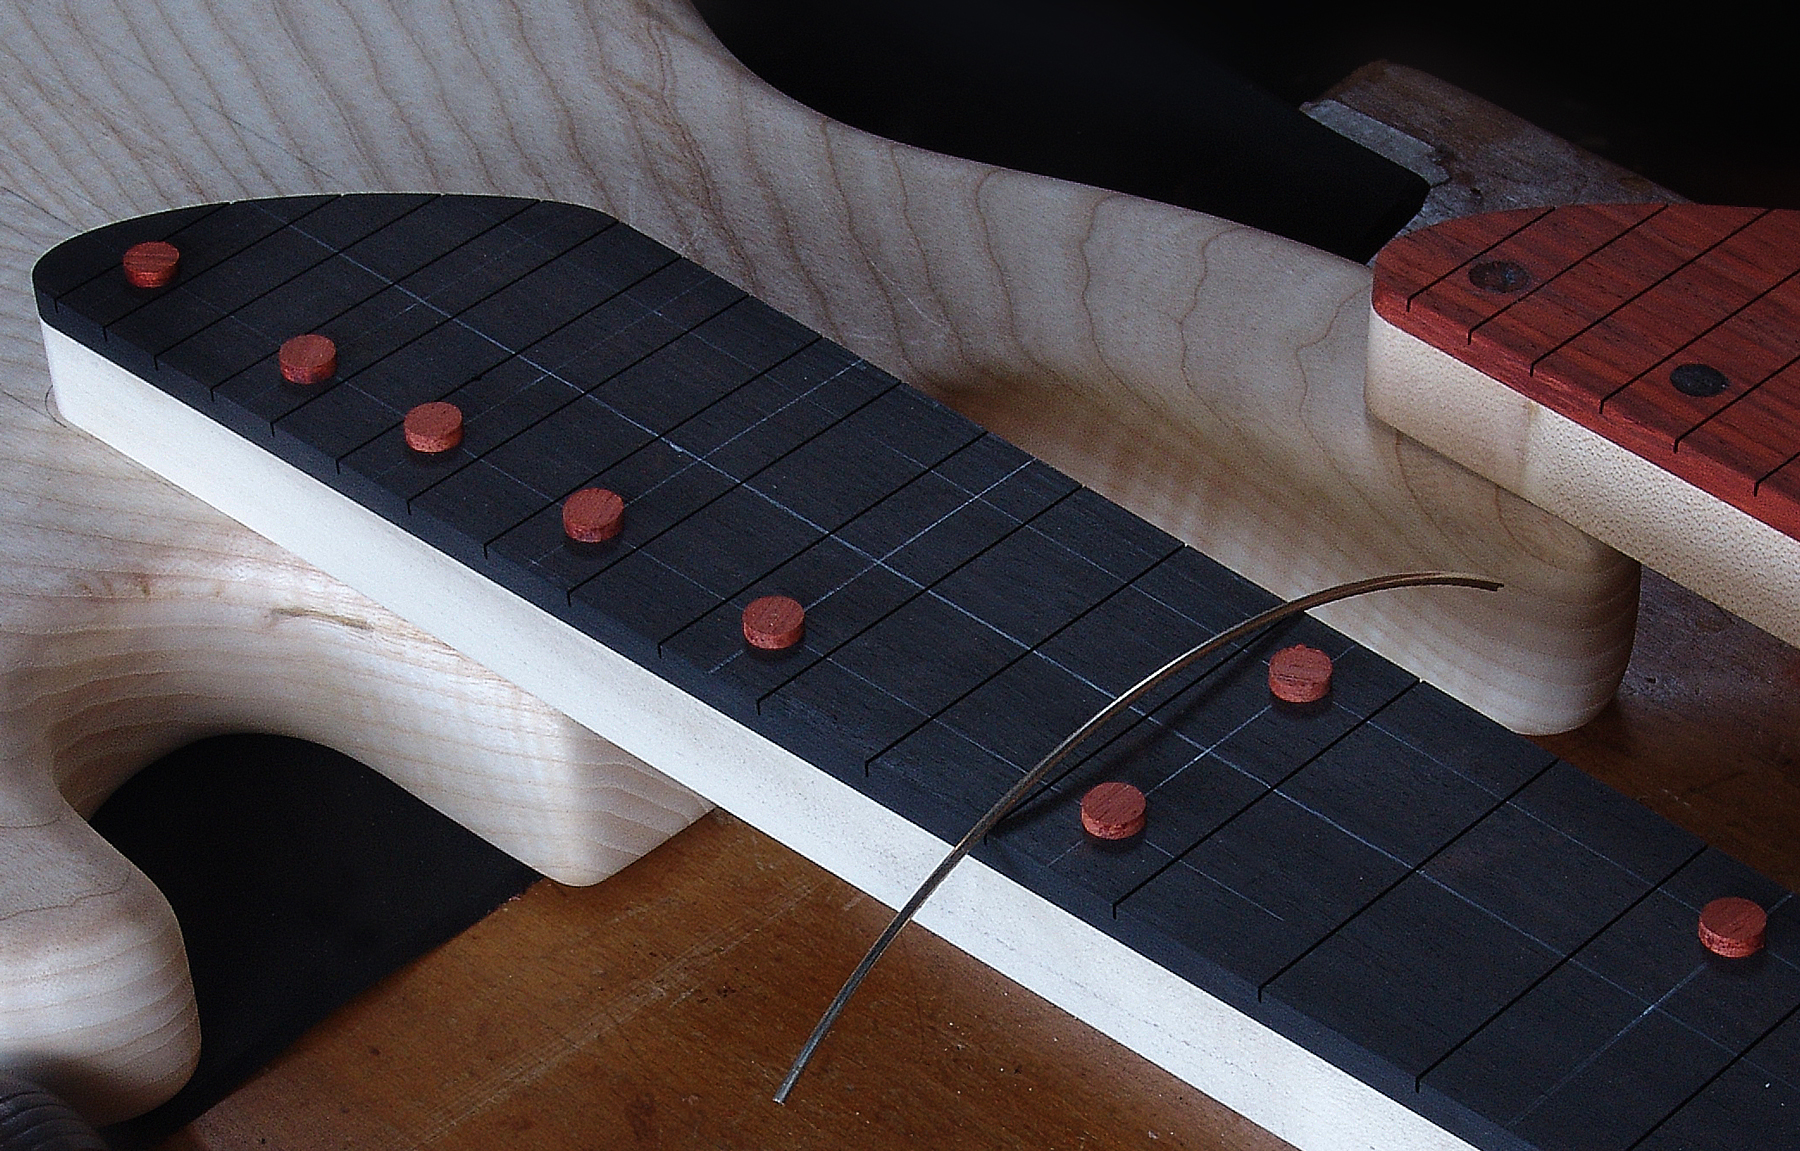 Guitar maker Peter Stephen lays out the components of an electric bass guitar